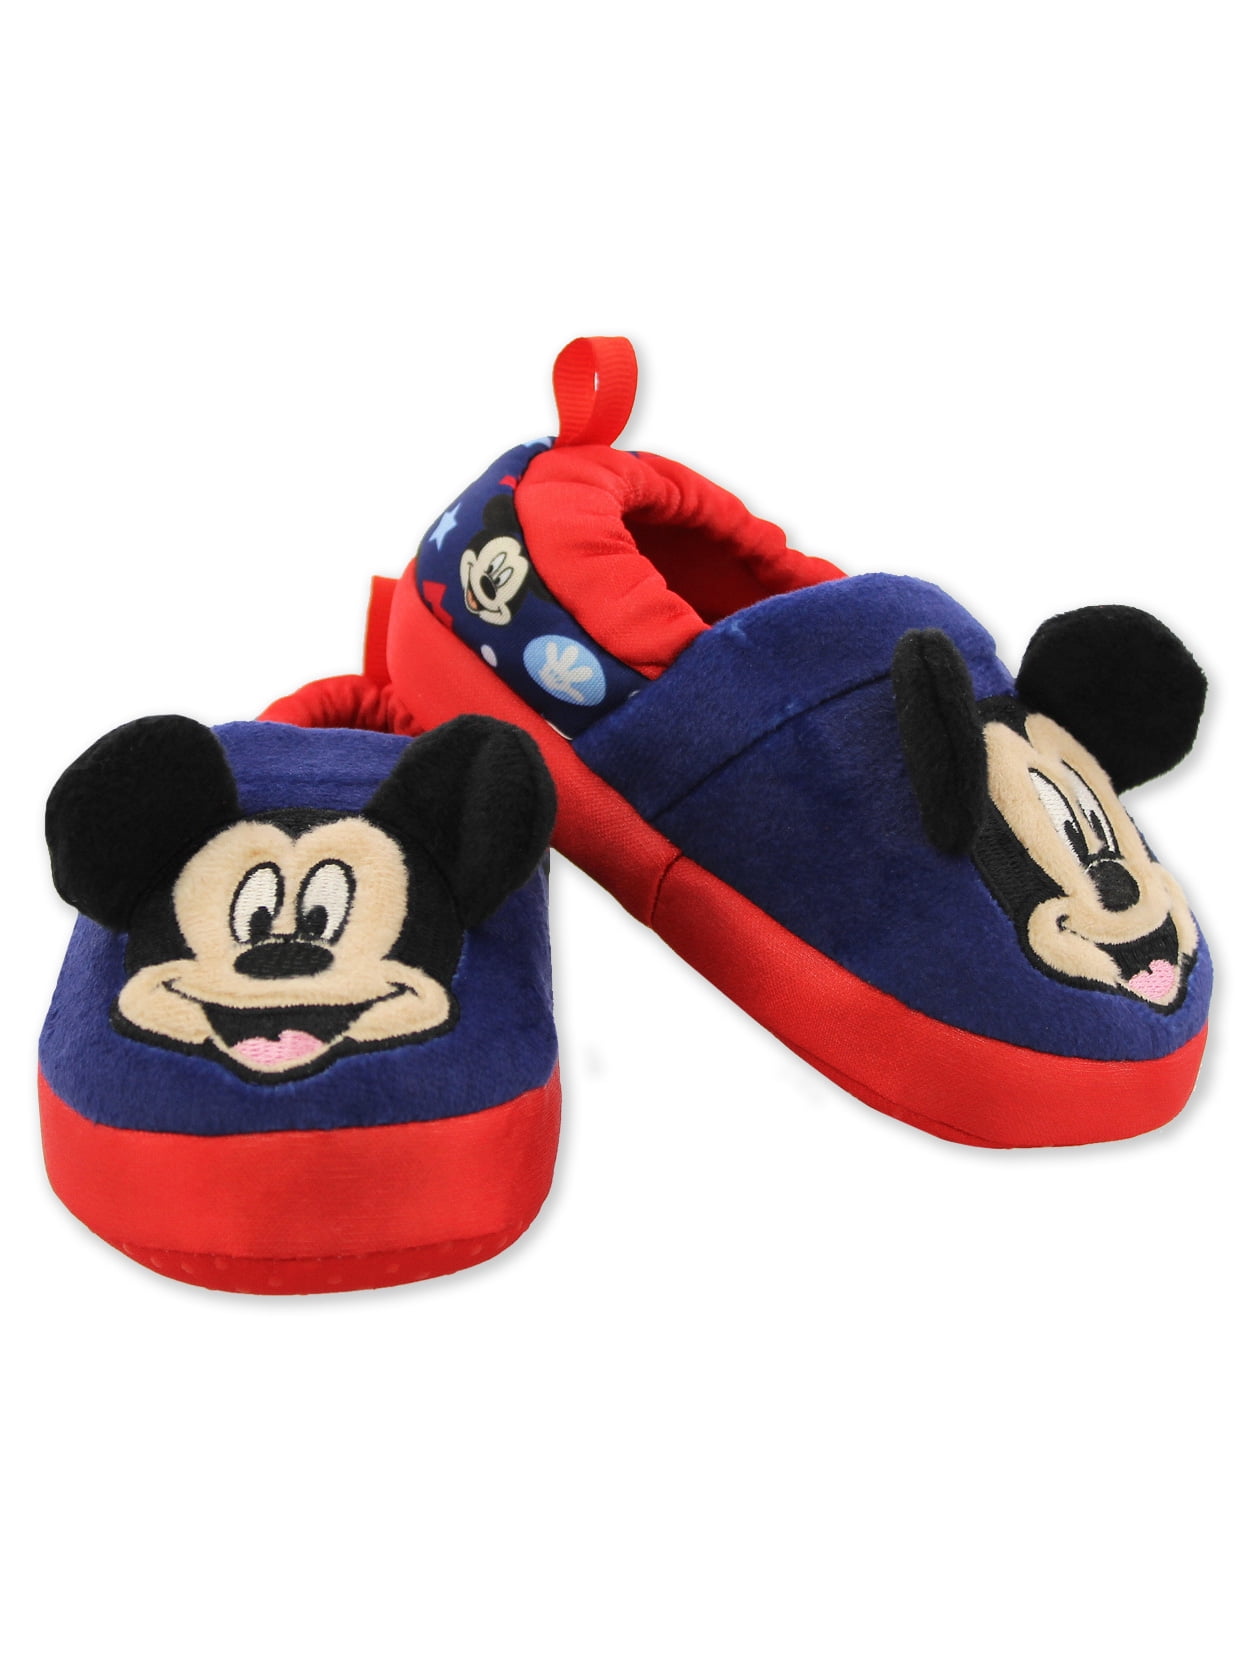 Disney Mickey Mouse Boys Bedroom Slippers Shoes Kids Toddler Boot Hard Sole New 